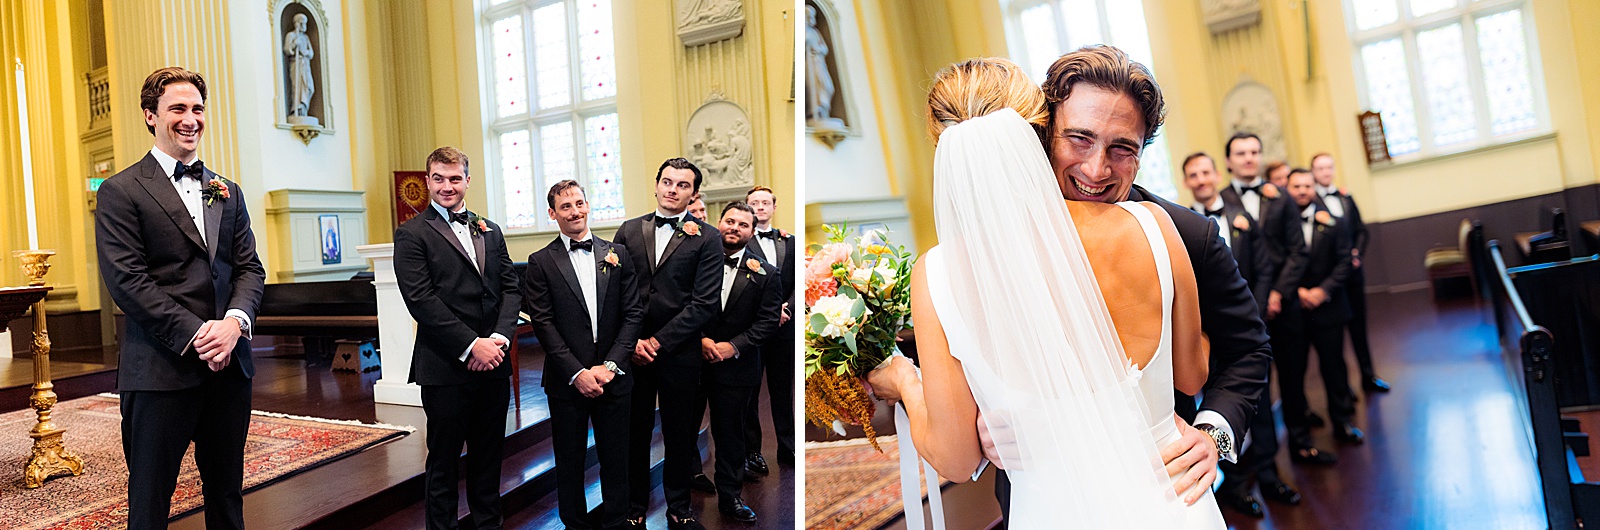 Groom has emotional reaction to bride walking down the aisle